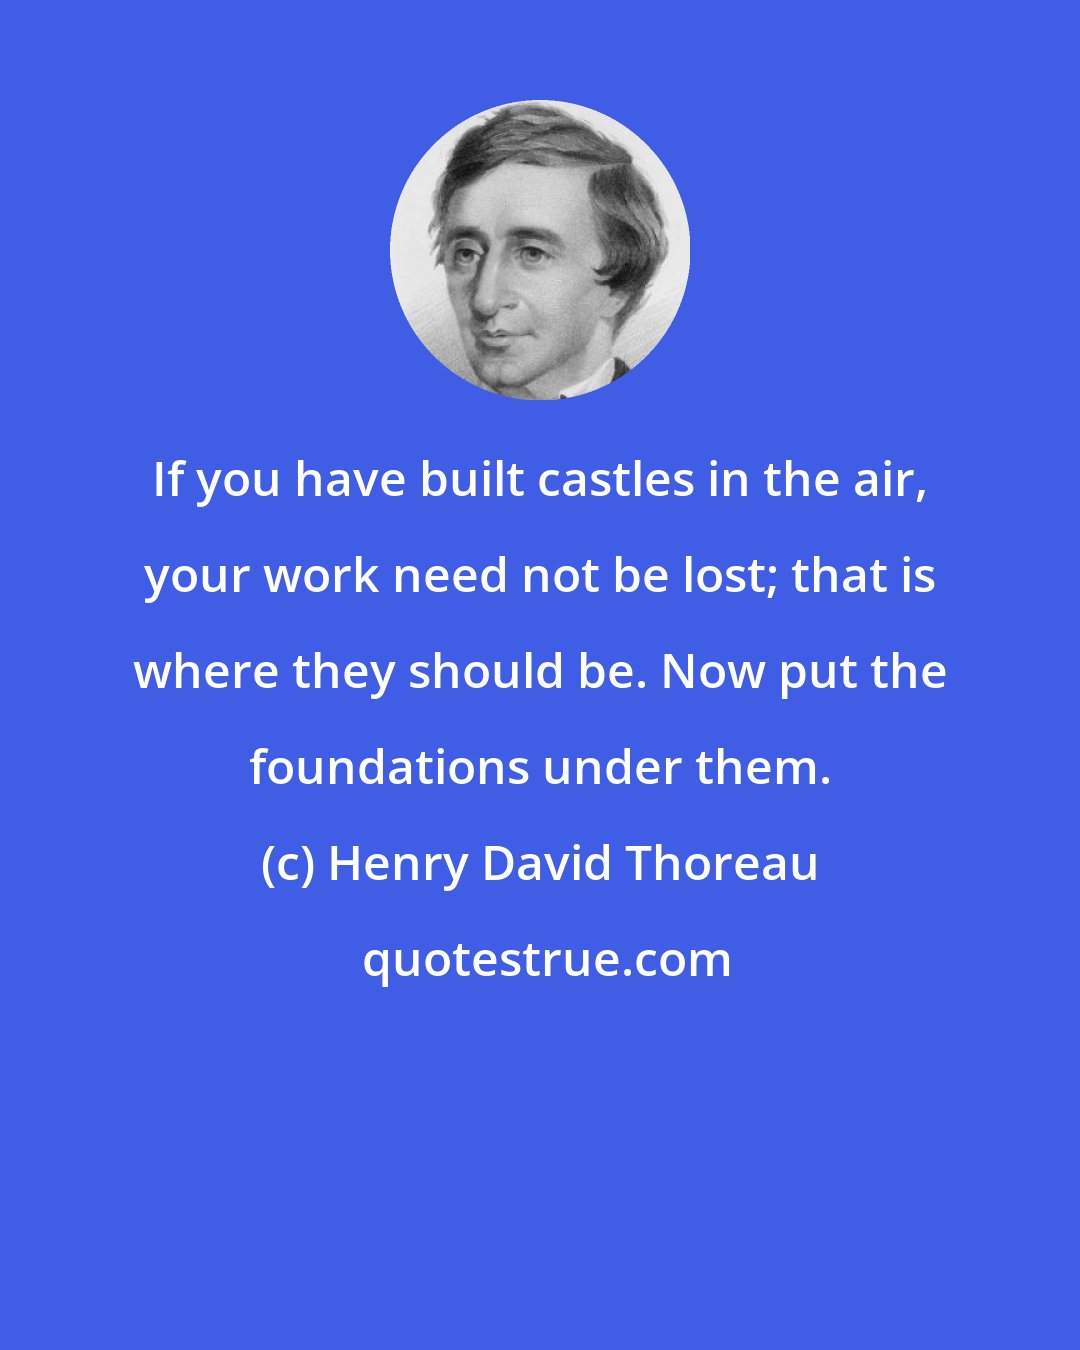 Henry David Thoreau: If you have built castles in the air, your work need not be lost; that is where they should be. Now put the foundations under them.